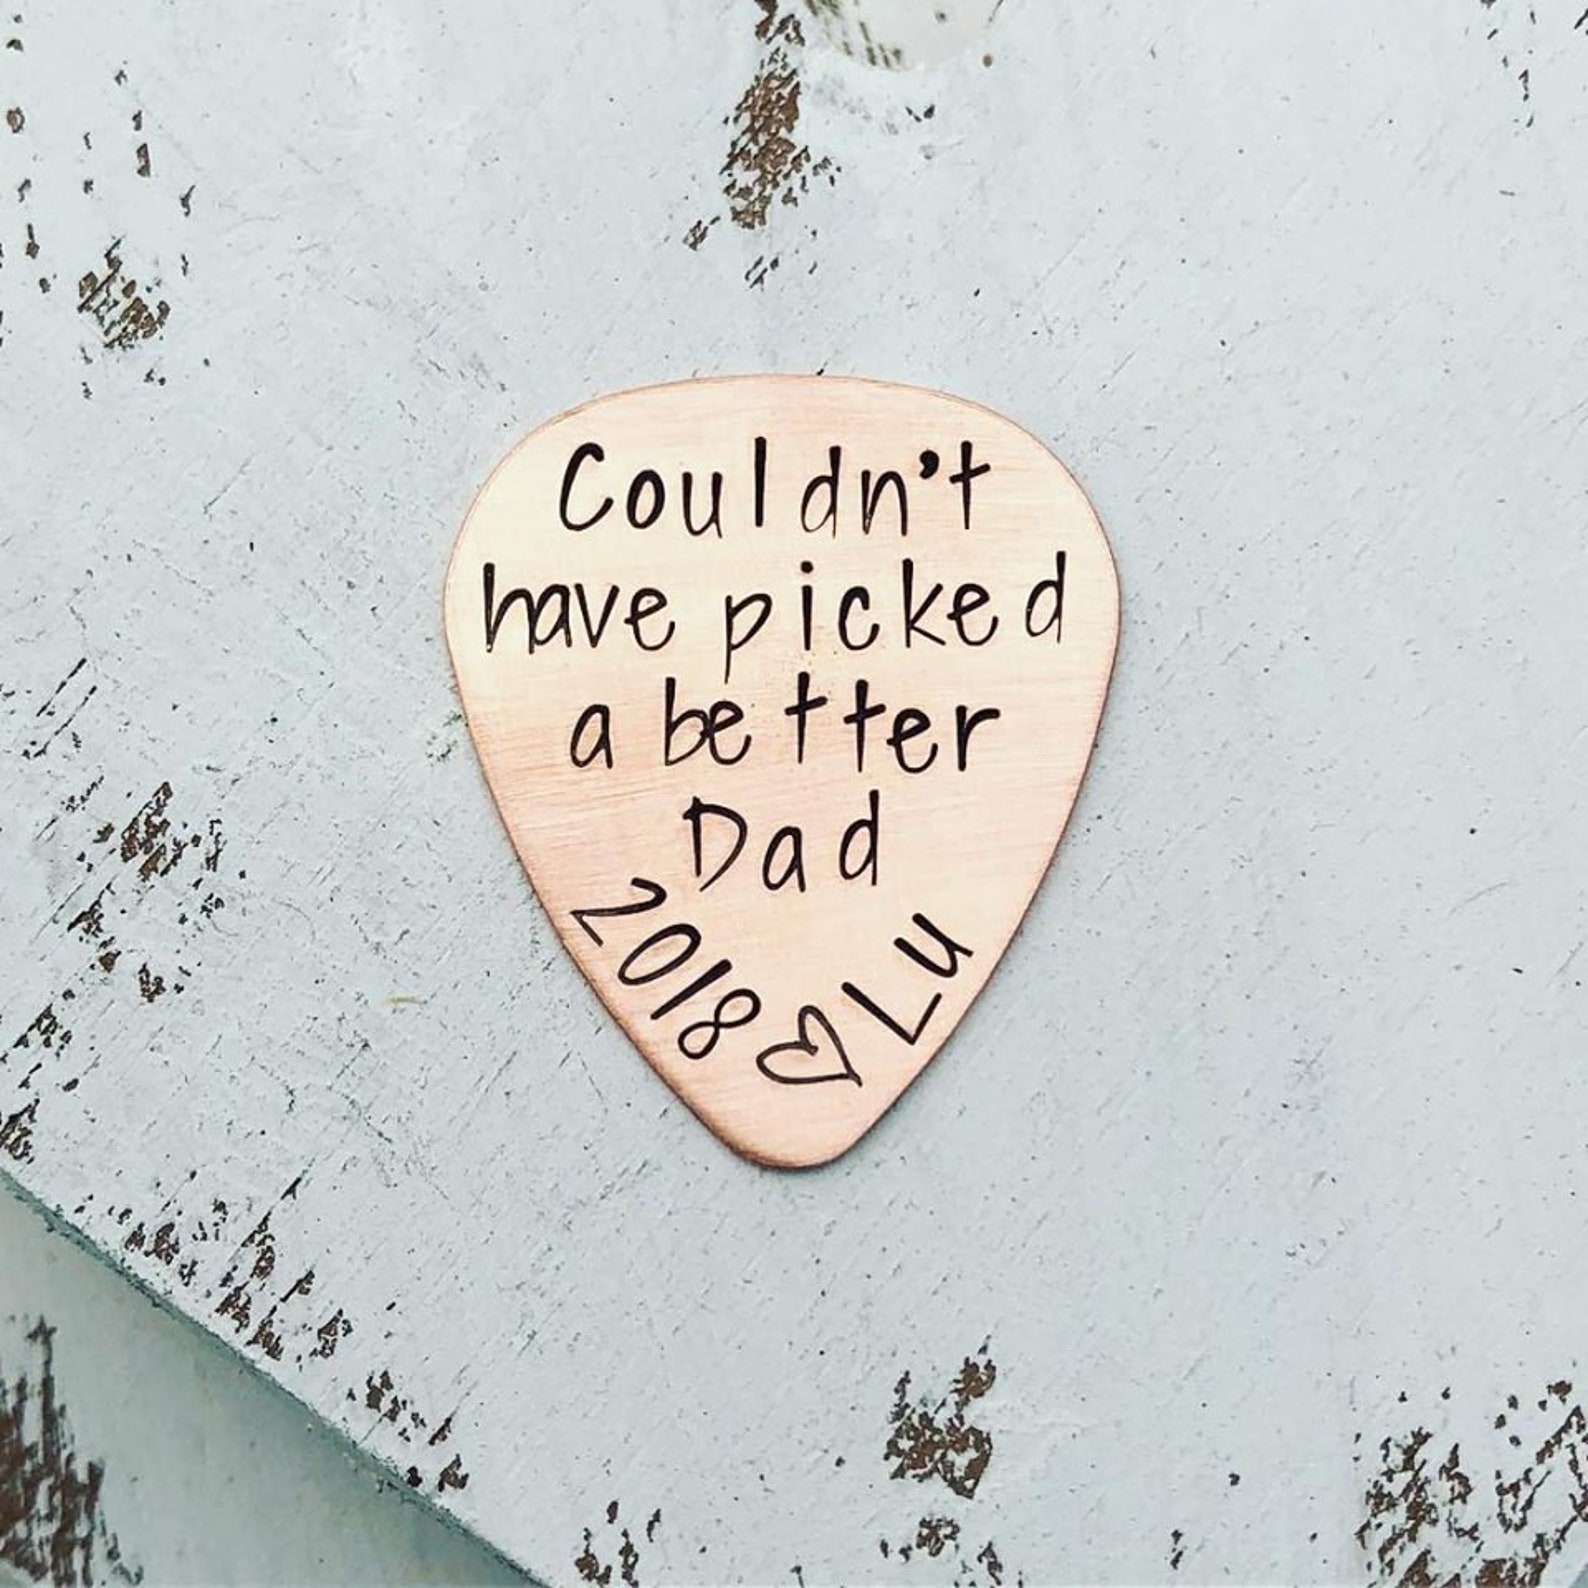 guitar-pick-for-dad-couldn-t-have-picked-a-better-dad-etsy